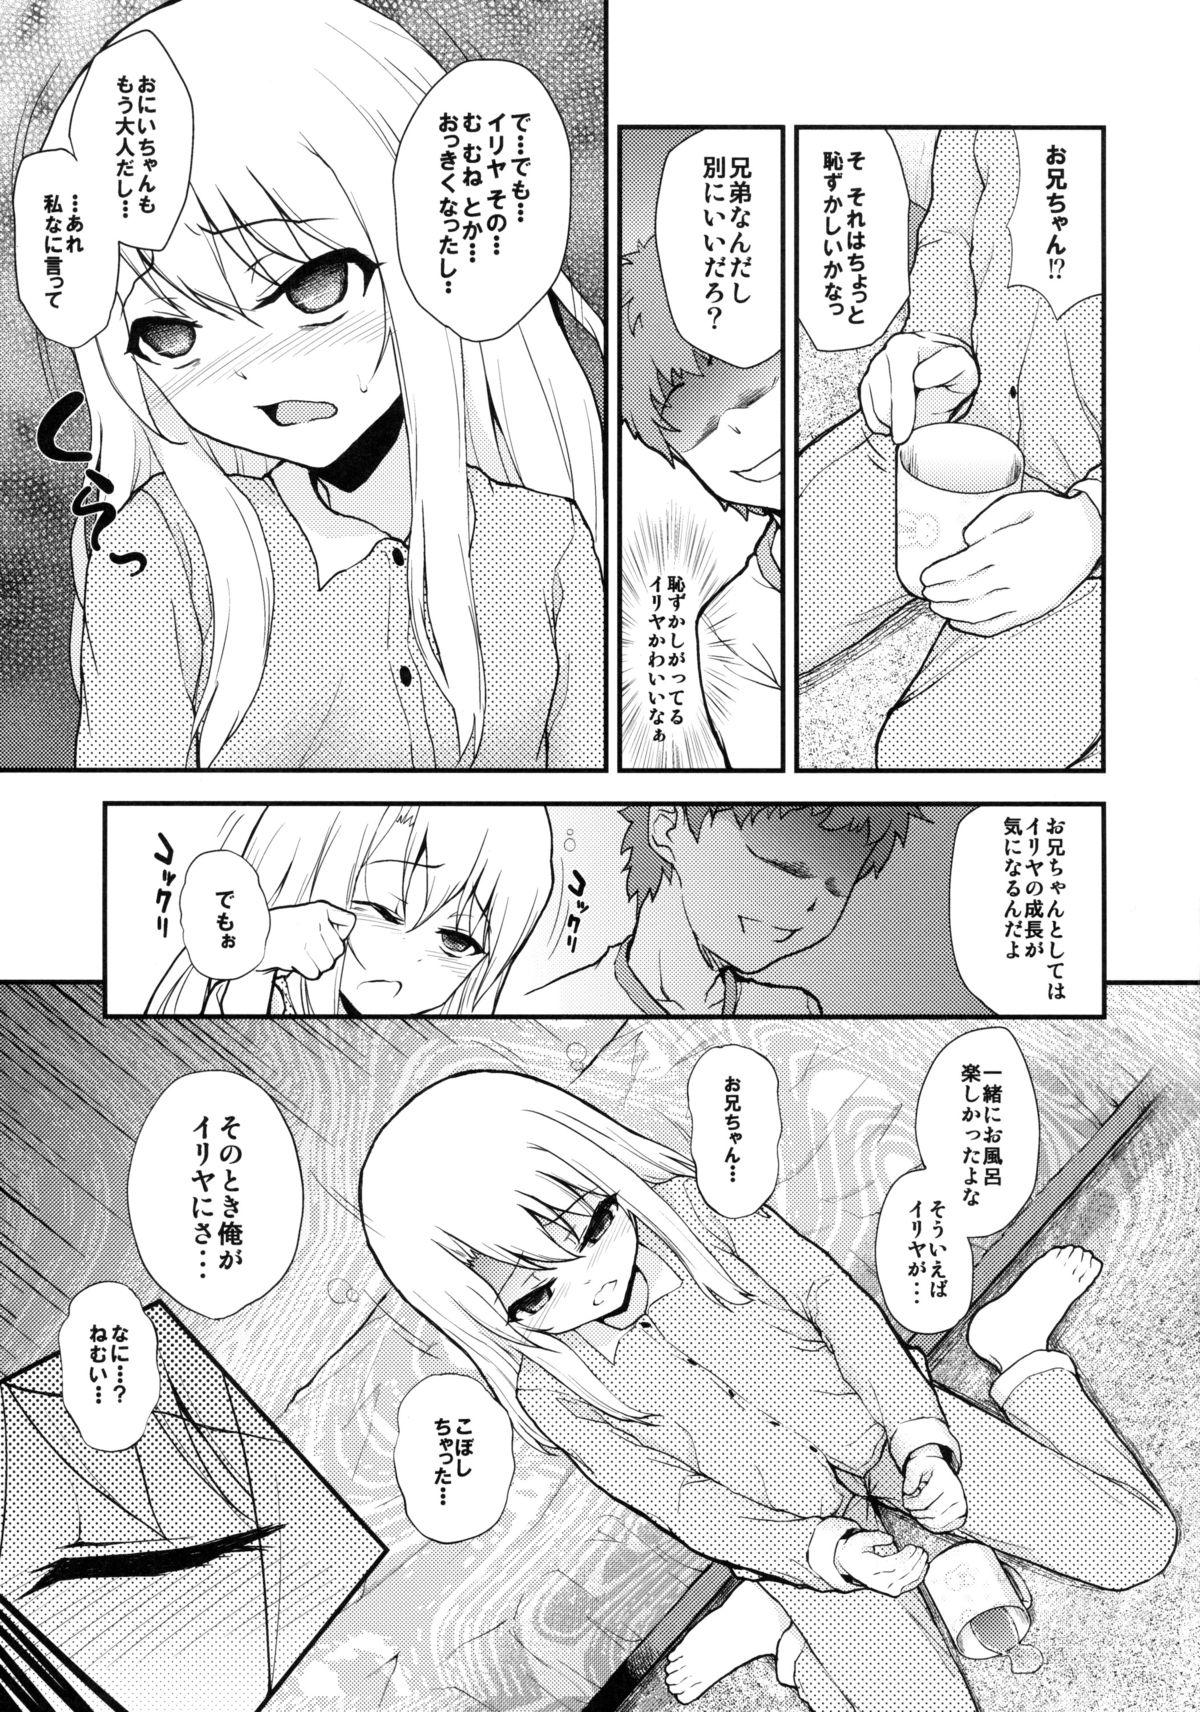 Masterbation Illya Doll - Fate kaleid liner prisma illya Gay Outdoors - Page 5